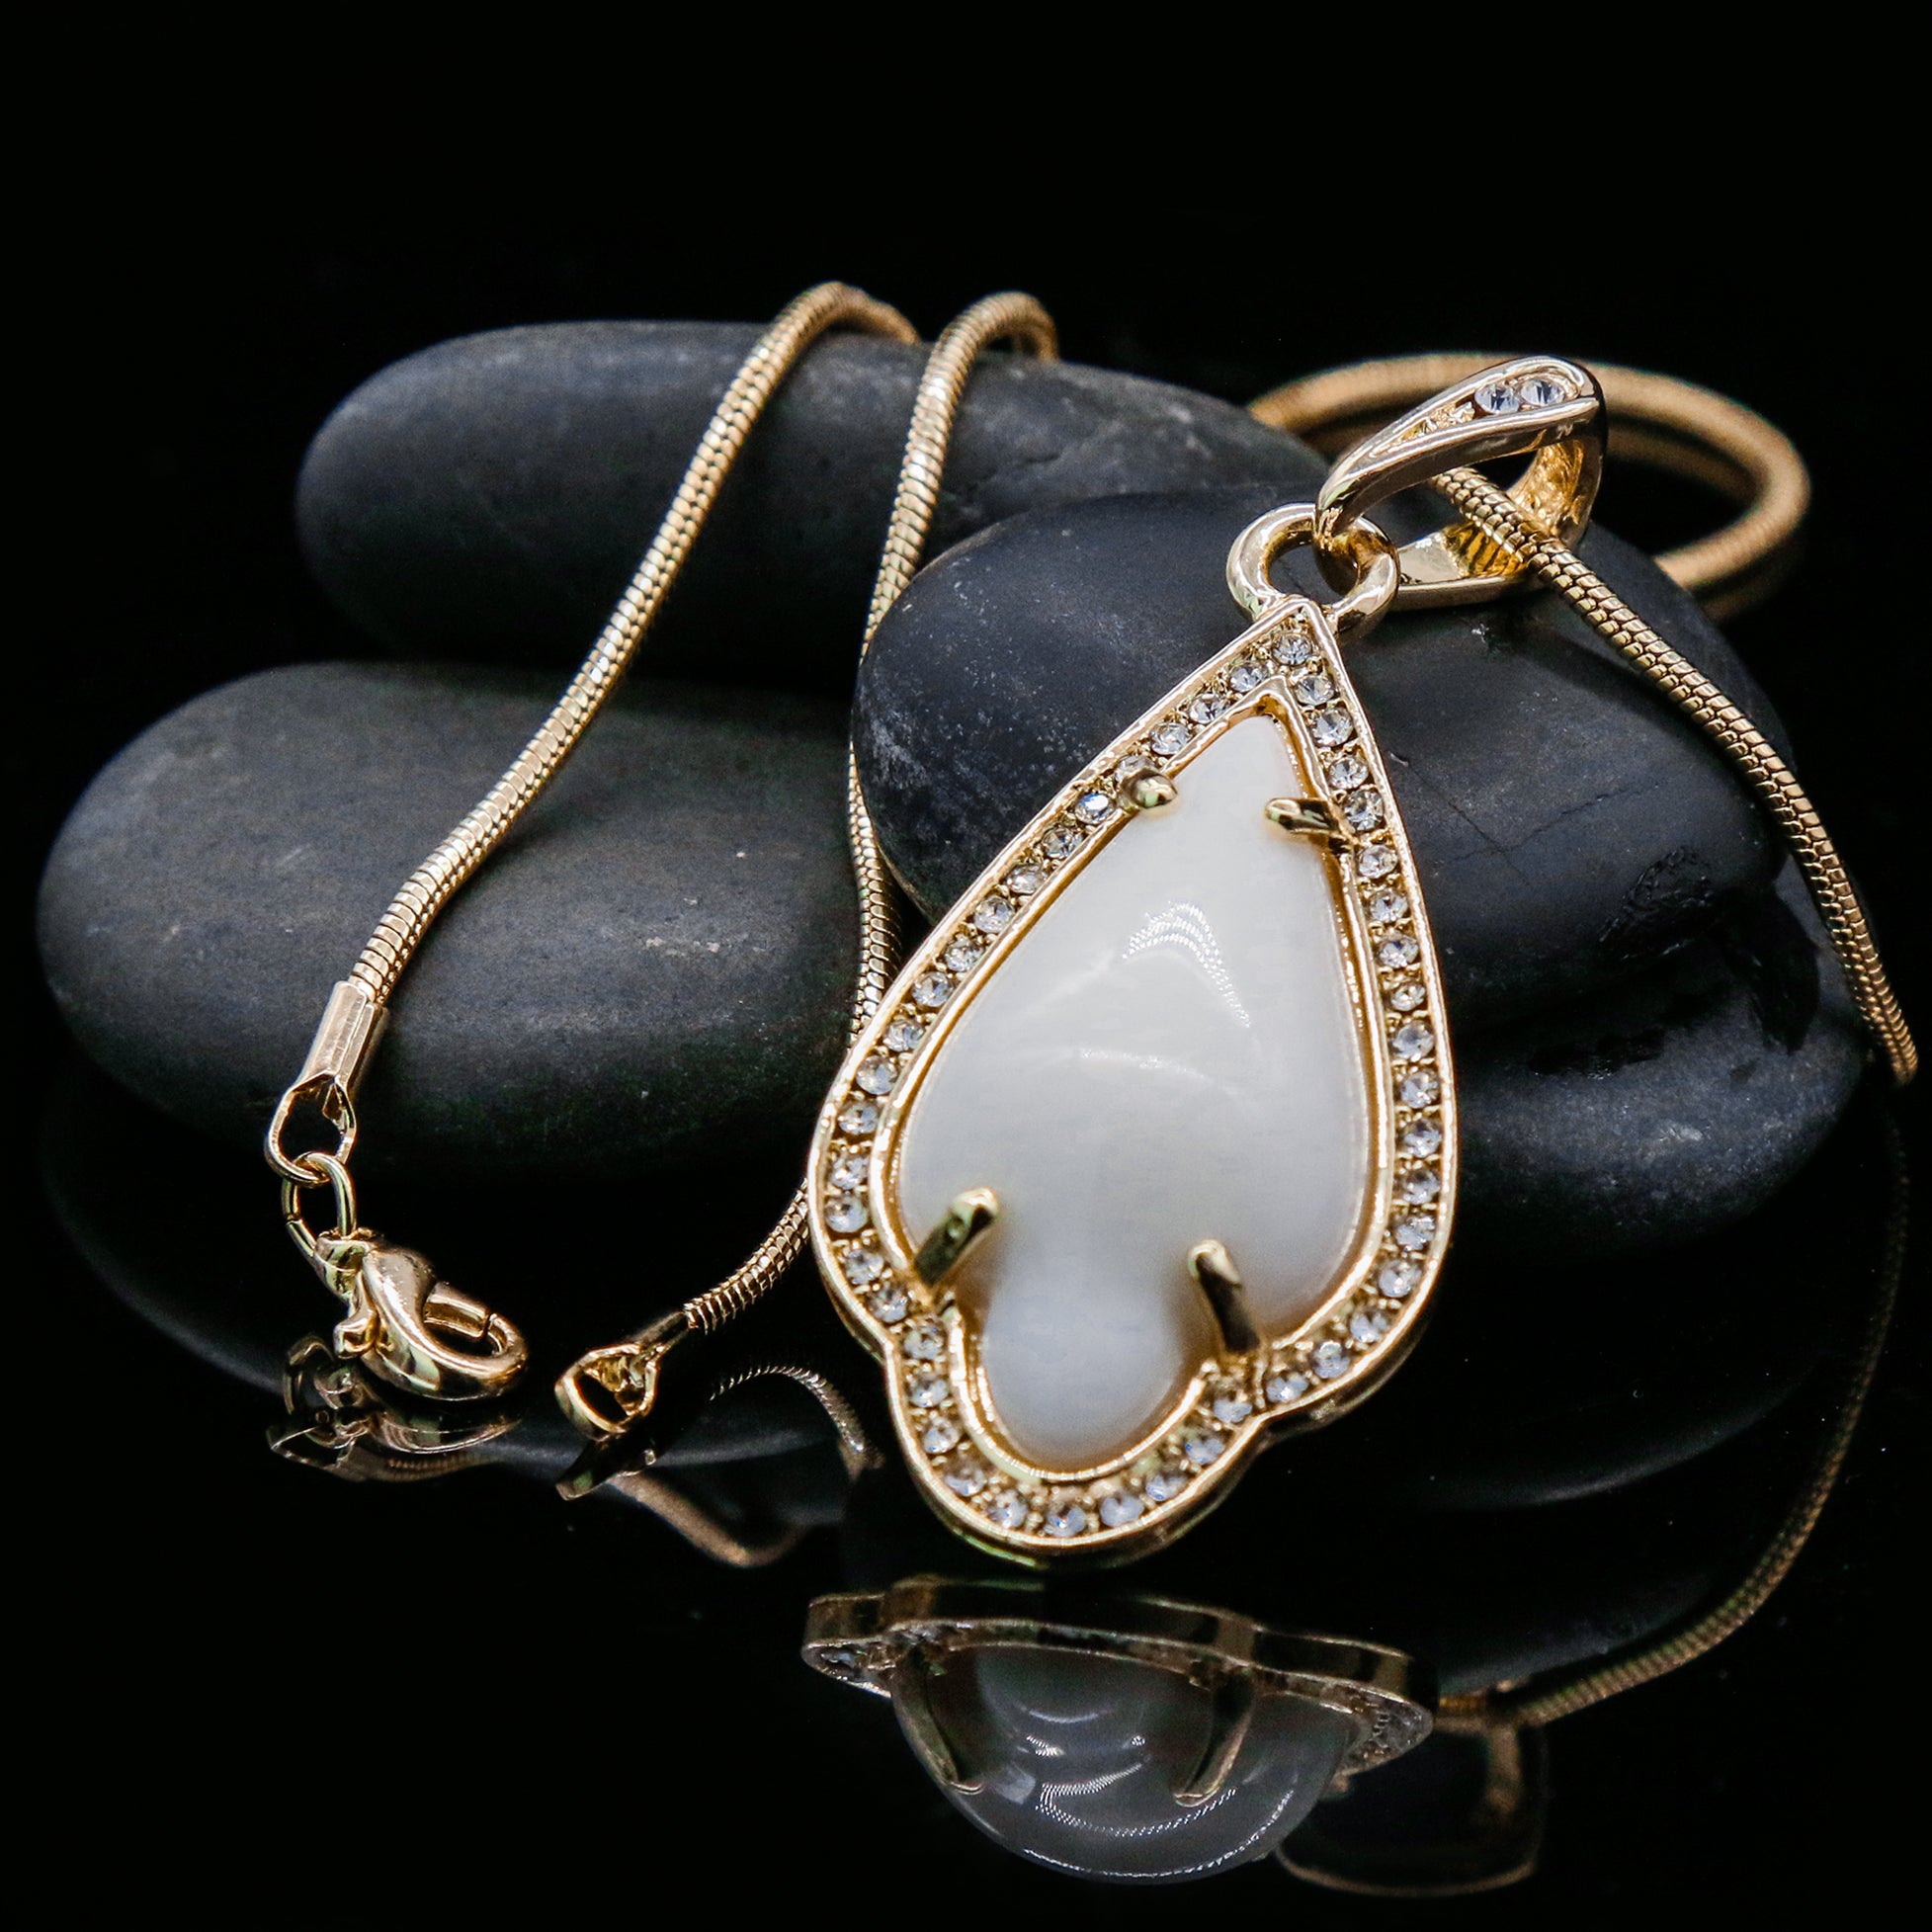 White Women's Pendants 14K Gold Plated Lab Diamond Mounted Curved Tear Resin Jade High Fashion Jewelry Chain Pendant Necklaces